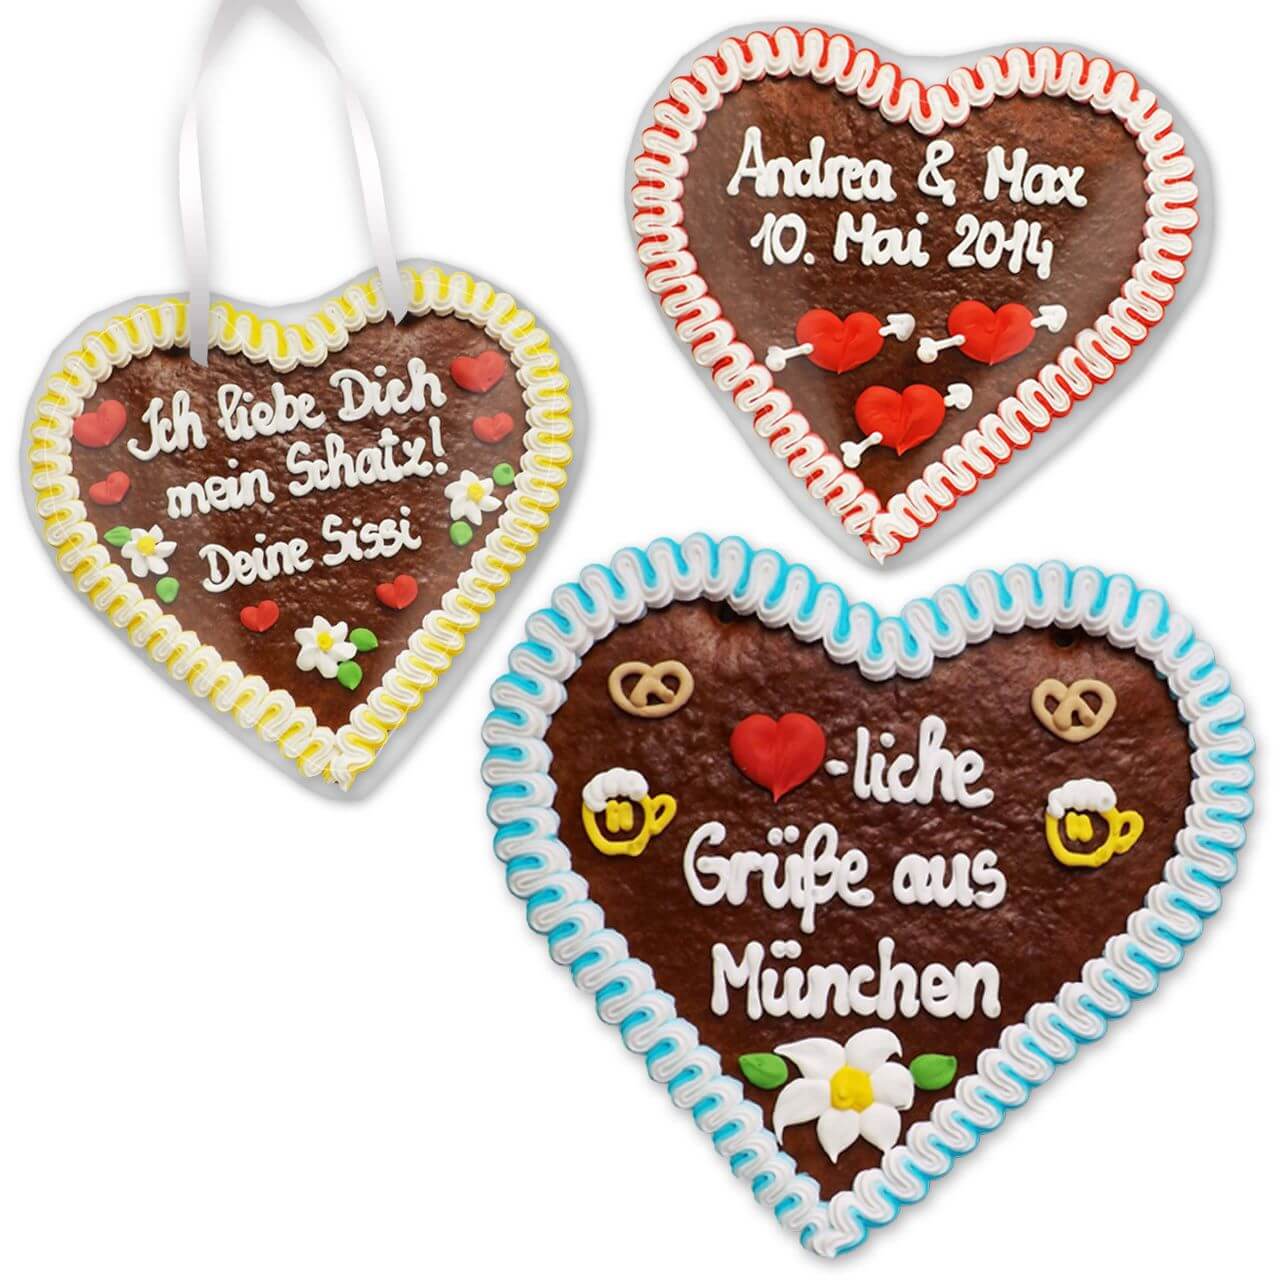 Customizable gingerbread heart 24cm as give-away